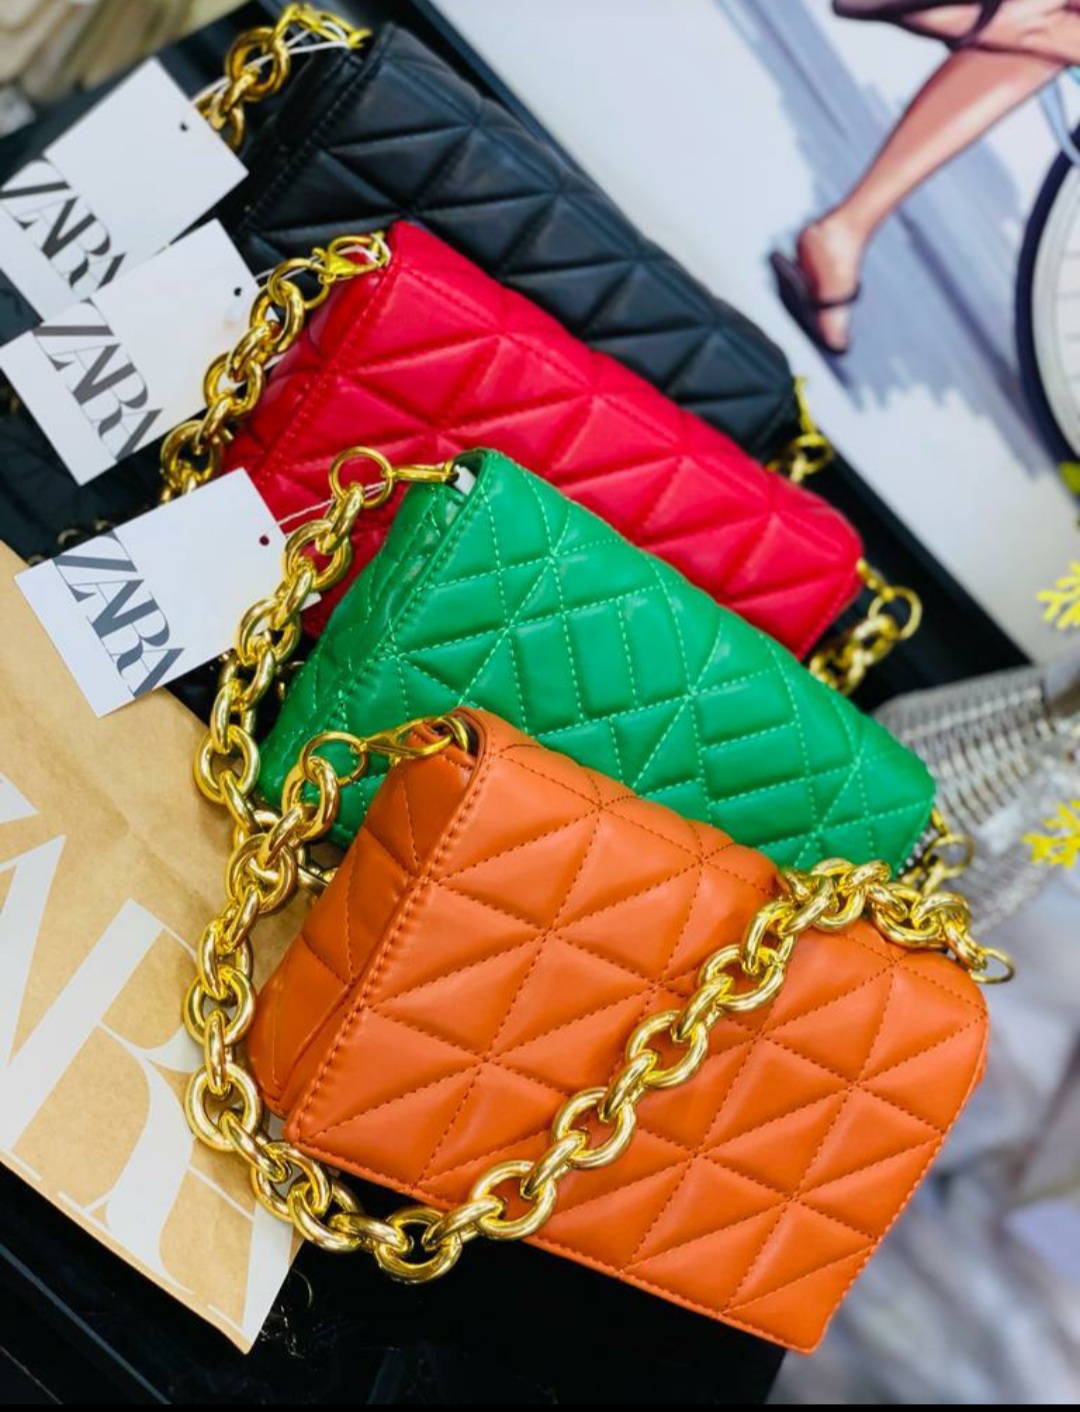 Fashion Diva - Zara hand bags msg for price | Facebook